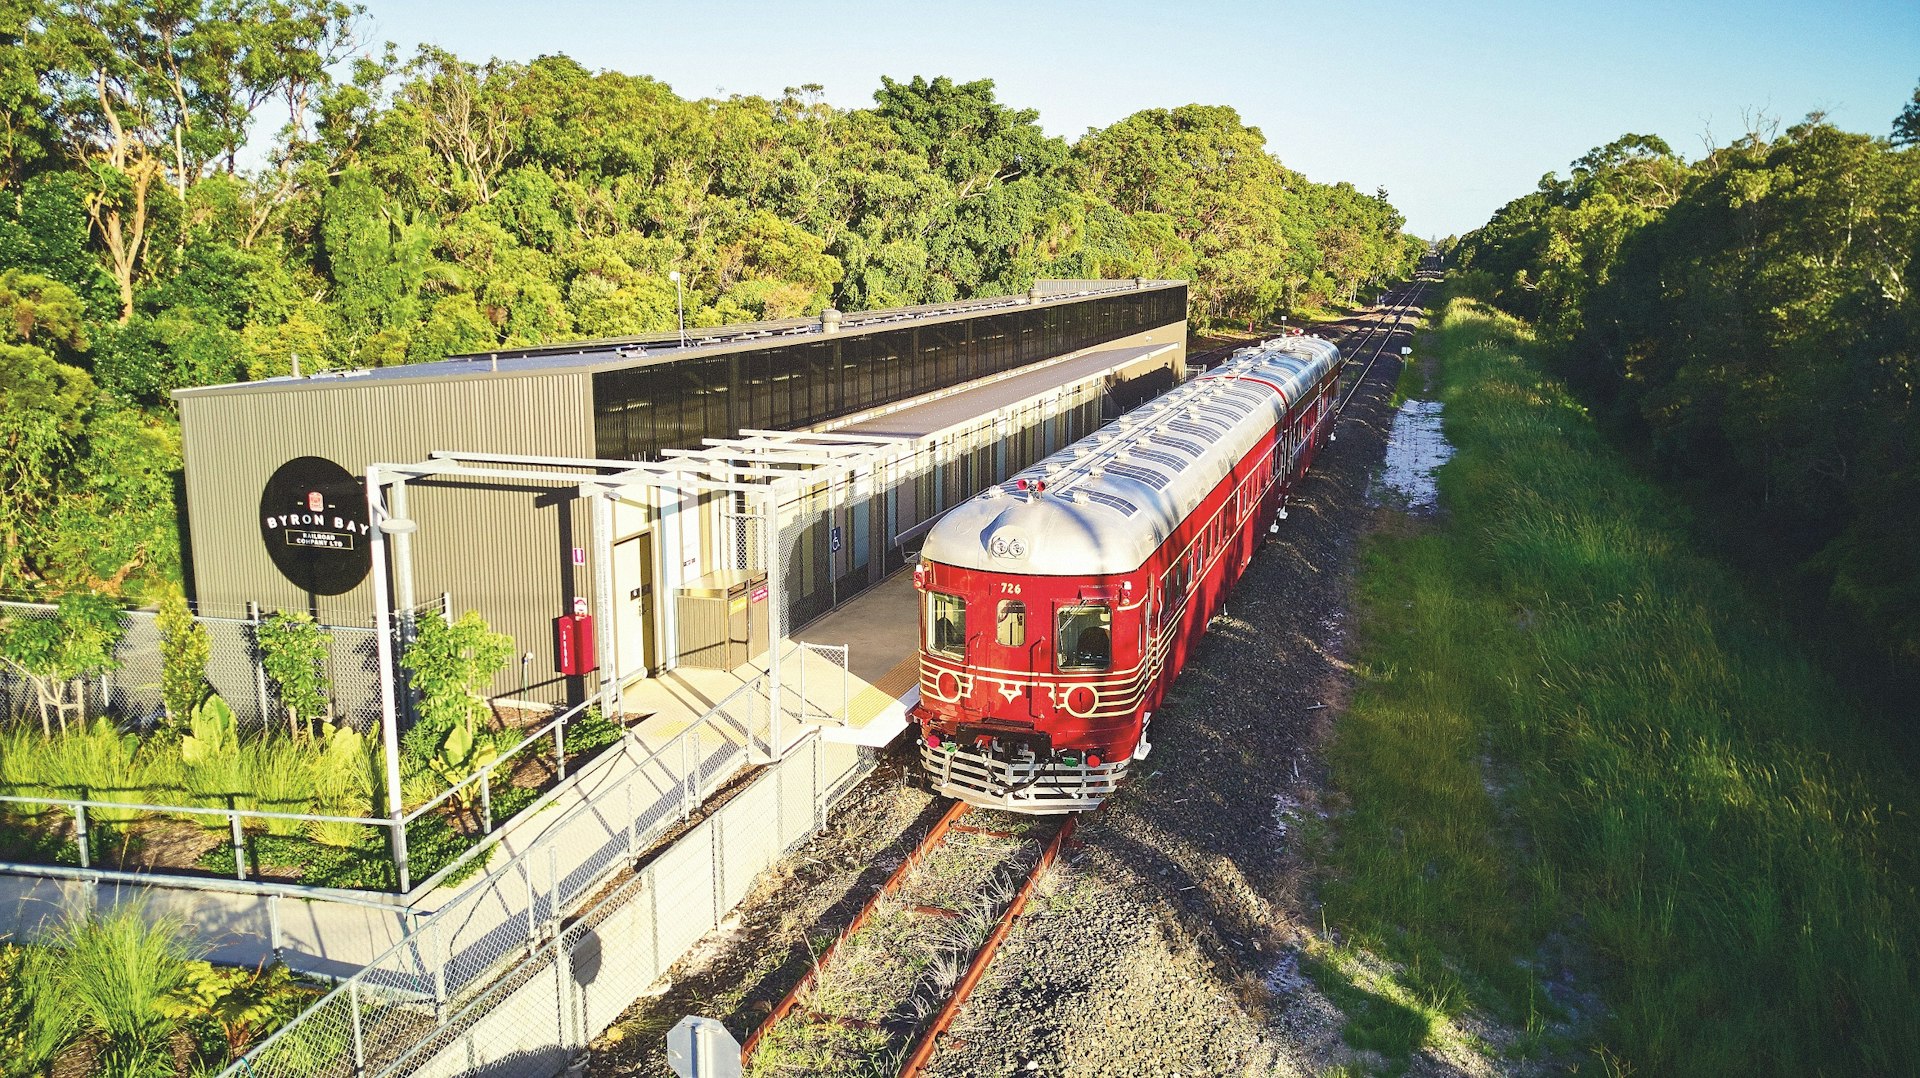 A red, two-carriage train stands outside a station. The roof of the train is covered in solar panels.